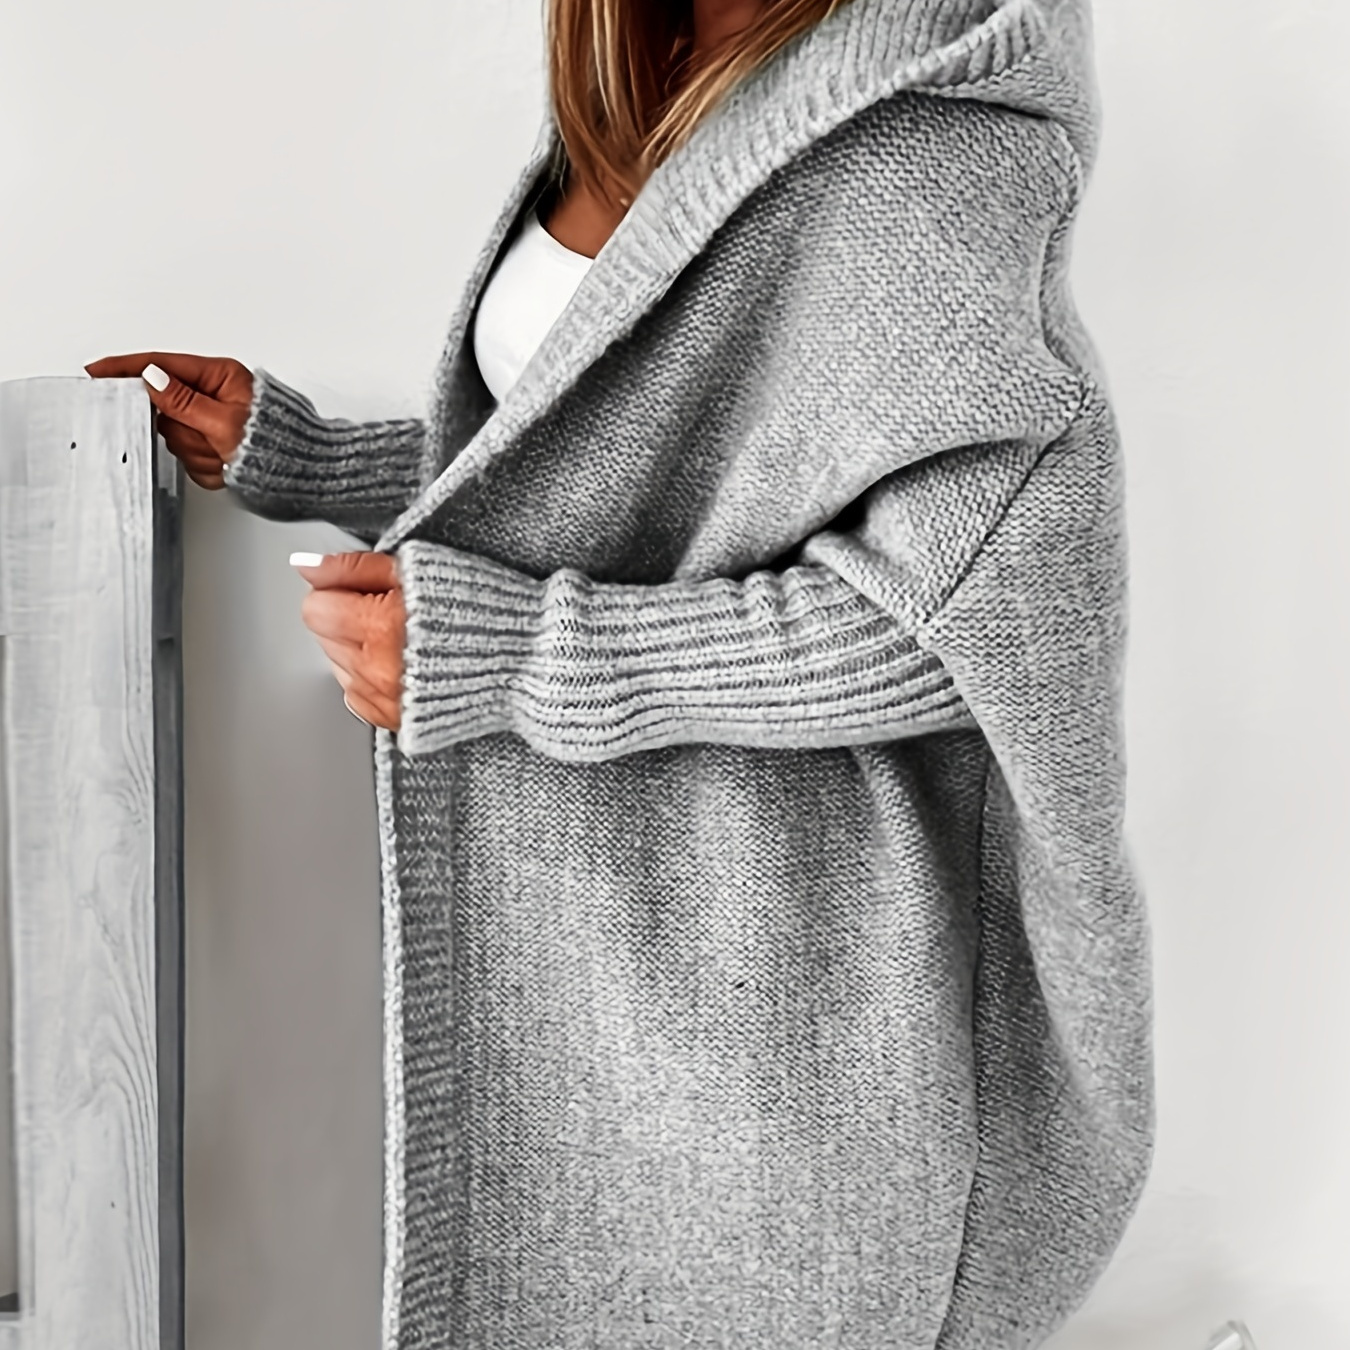 Oversized Hooded Knitted Cardigan, Long Sleeve Casual Sweater For Winter & Fall, Women's Clothing